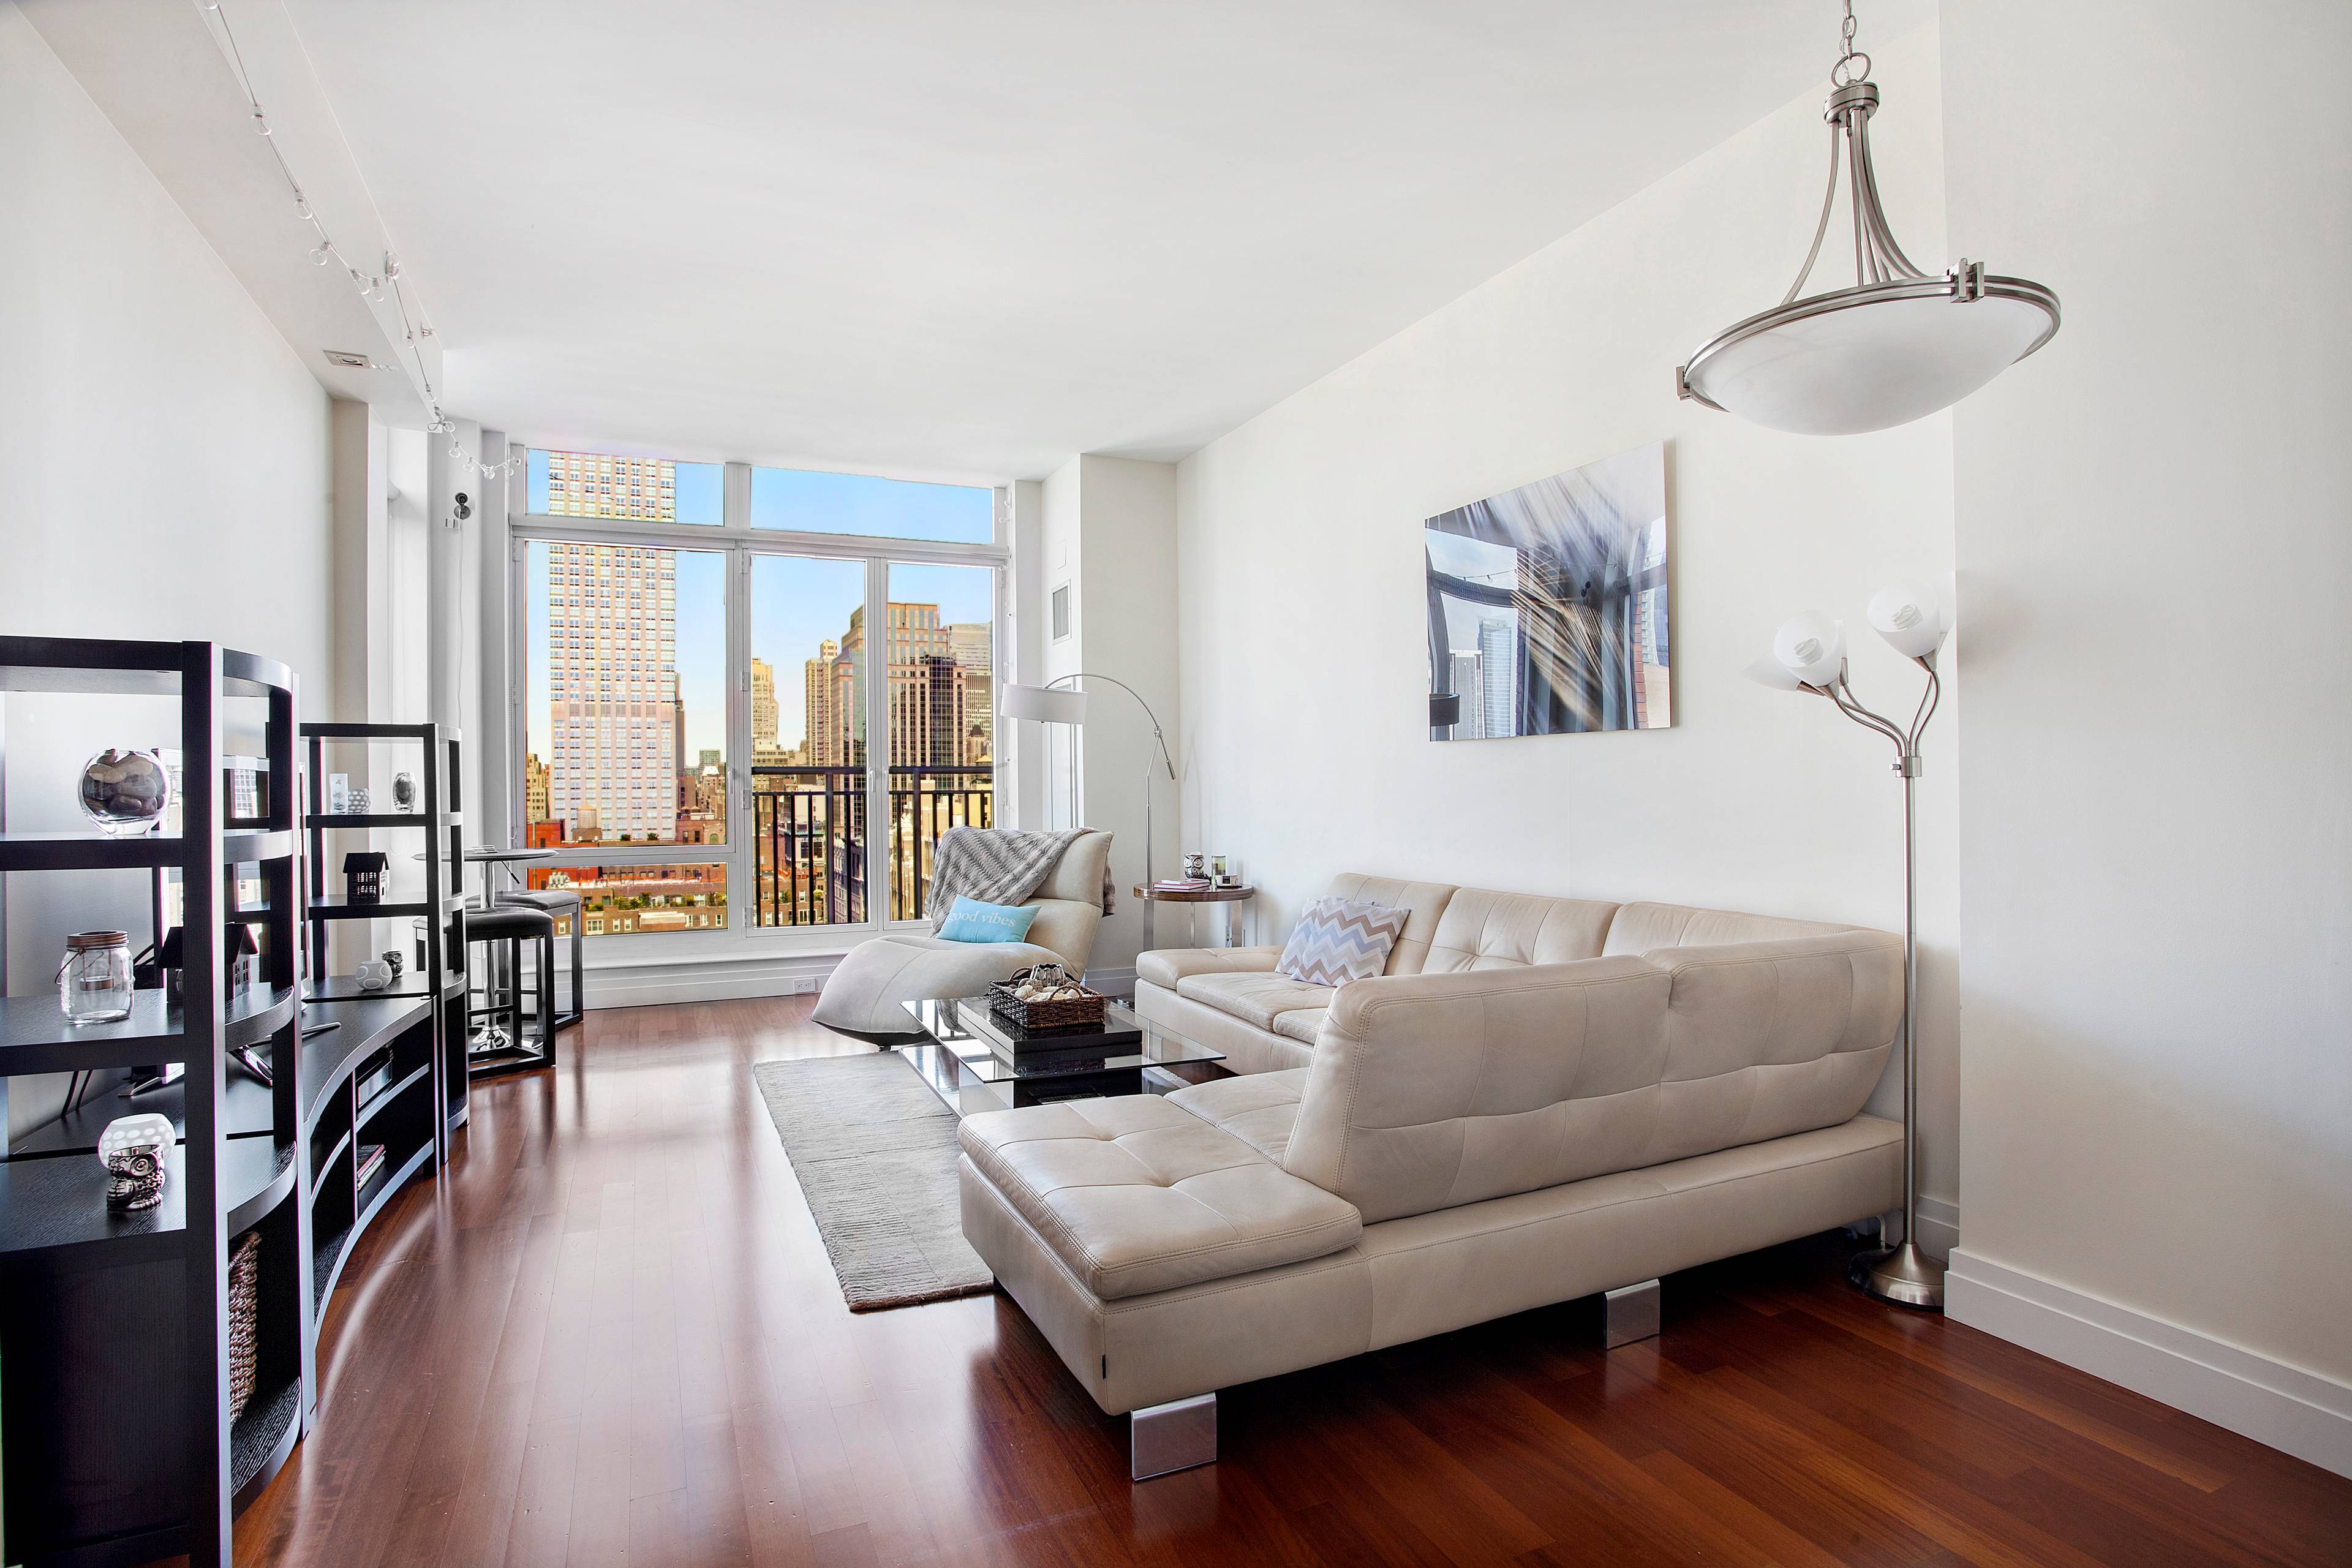 New To Market Stunning Two Bedroom Furnished or Unfurnished Penthouse High above Park Avenue !